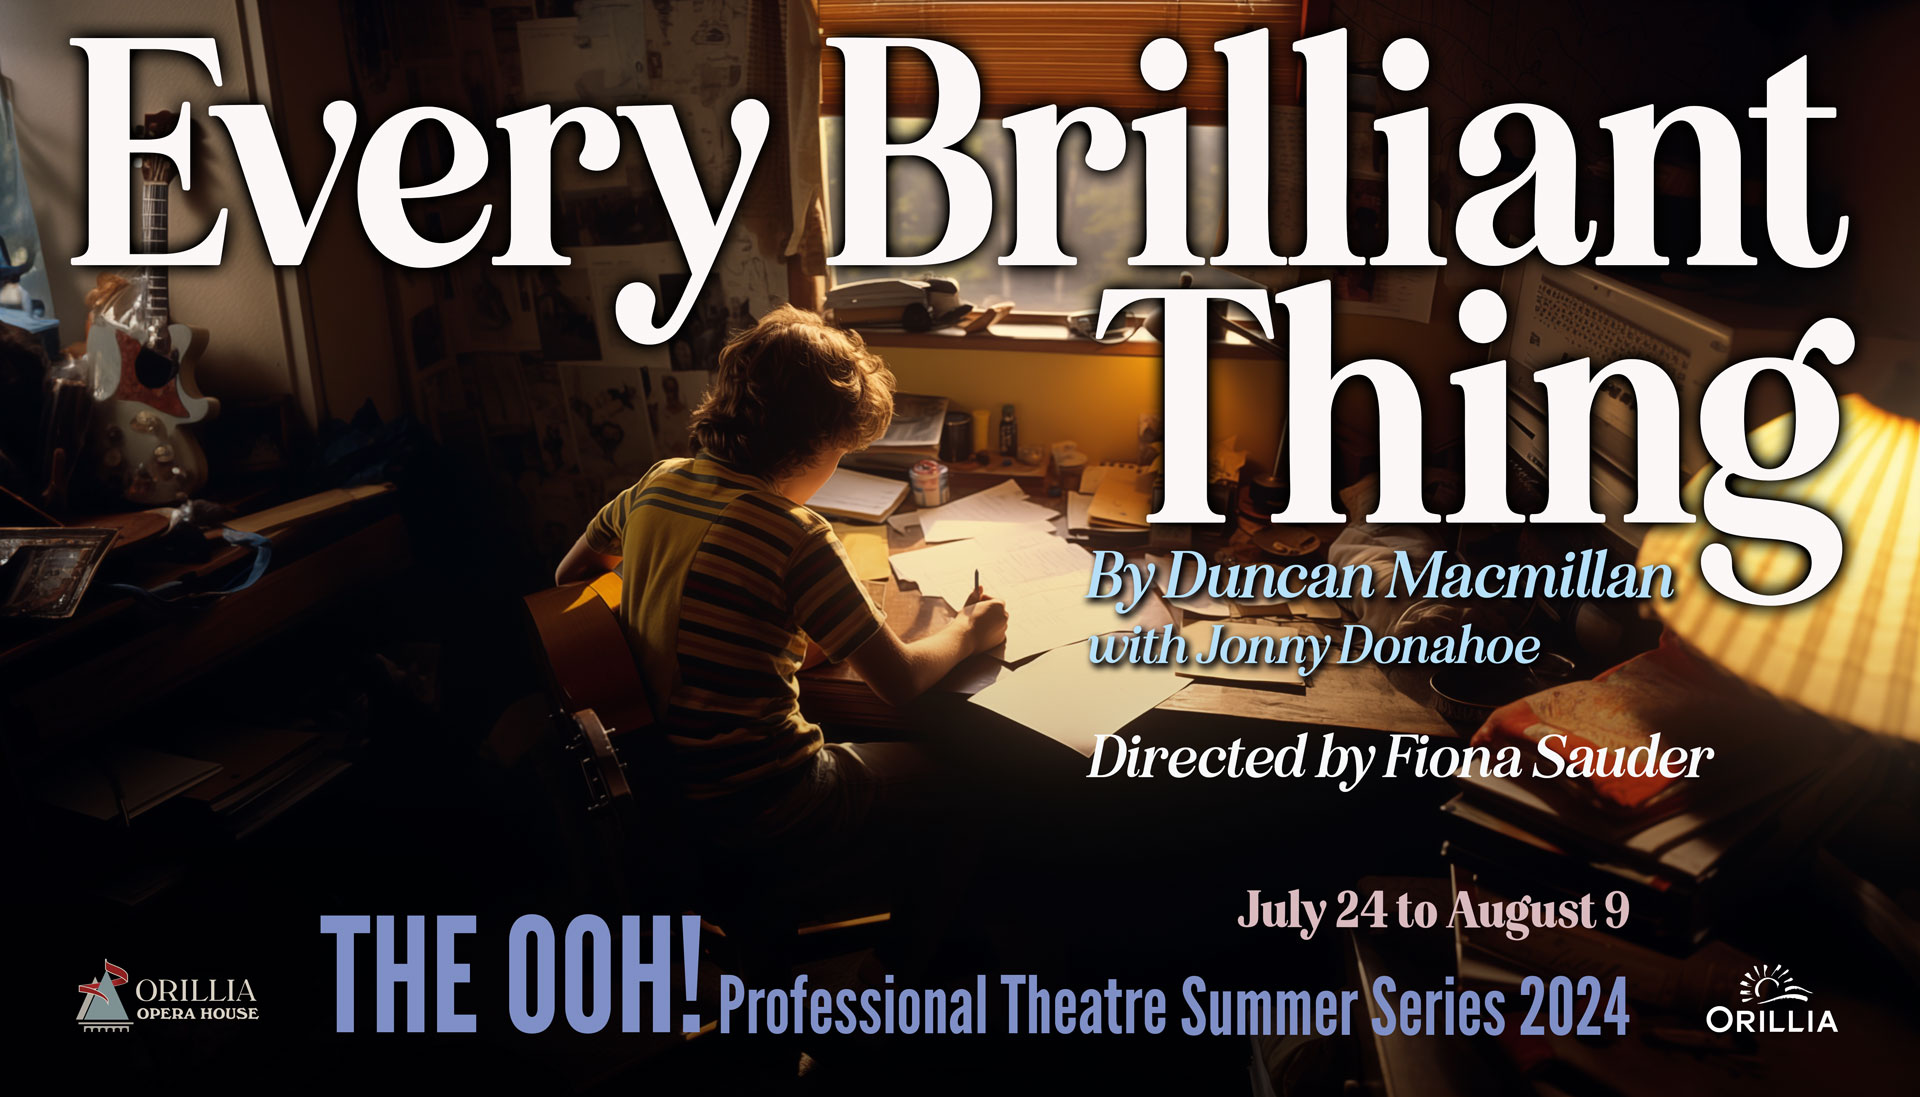 Every Brilliant Thing at Orillia Opera House